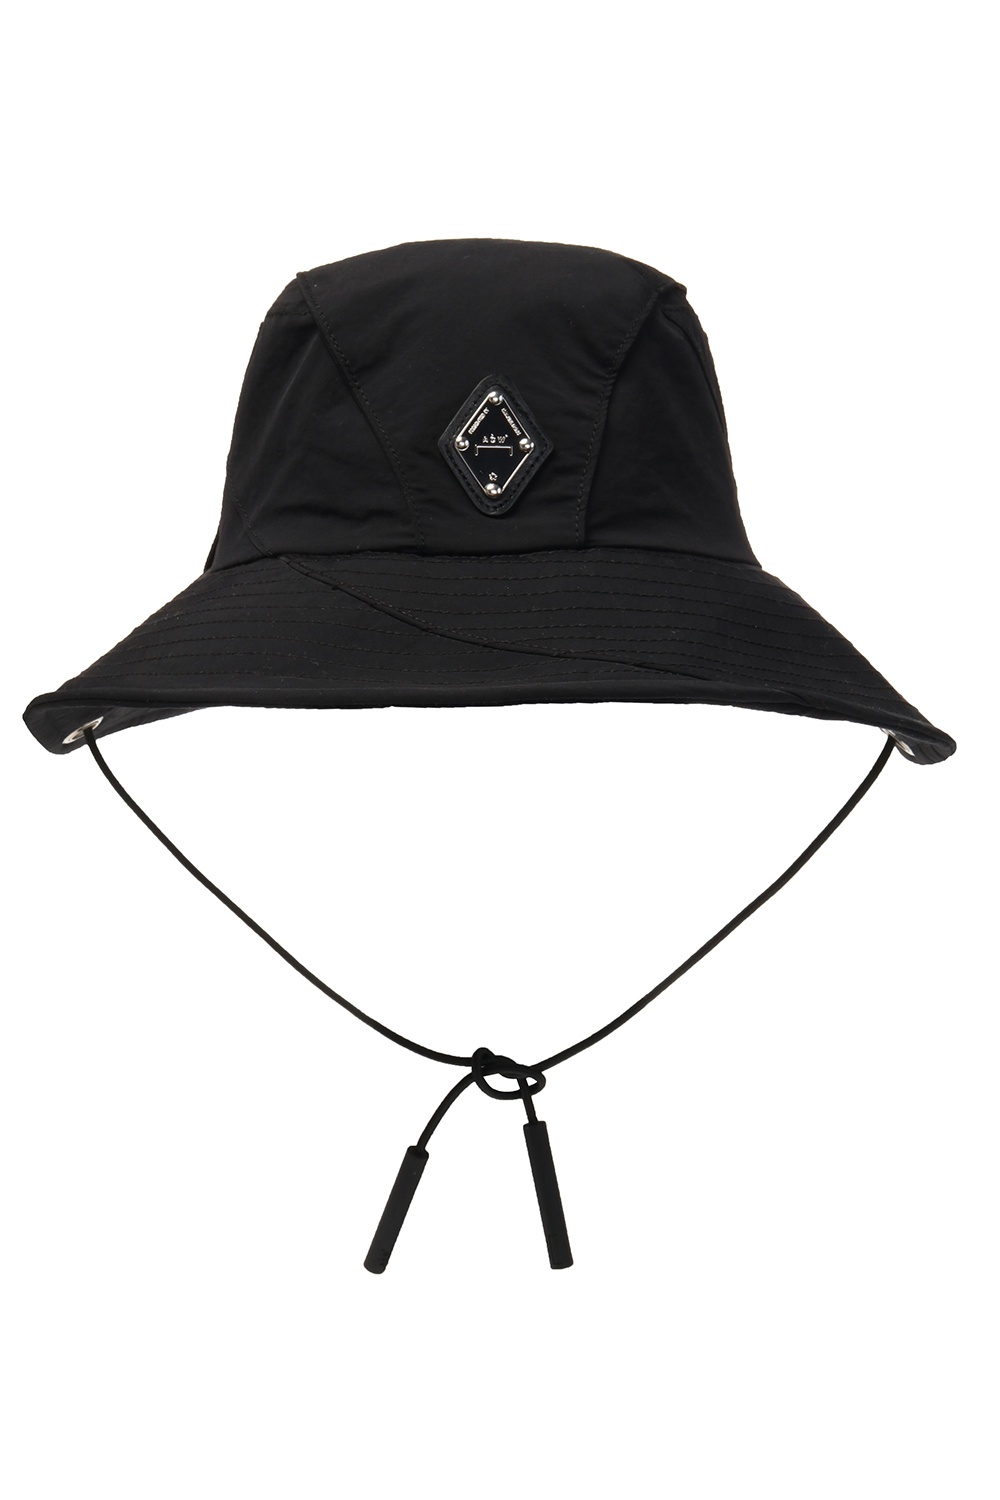 A-COLD-WALL* Logo hat